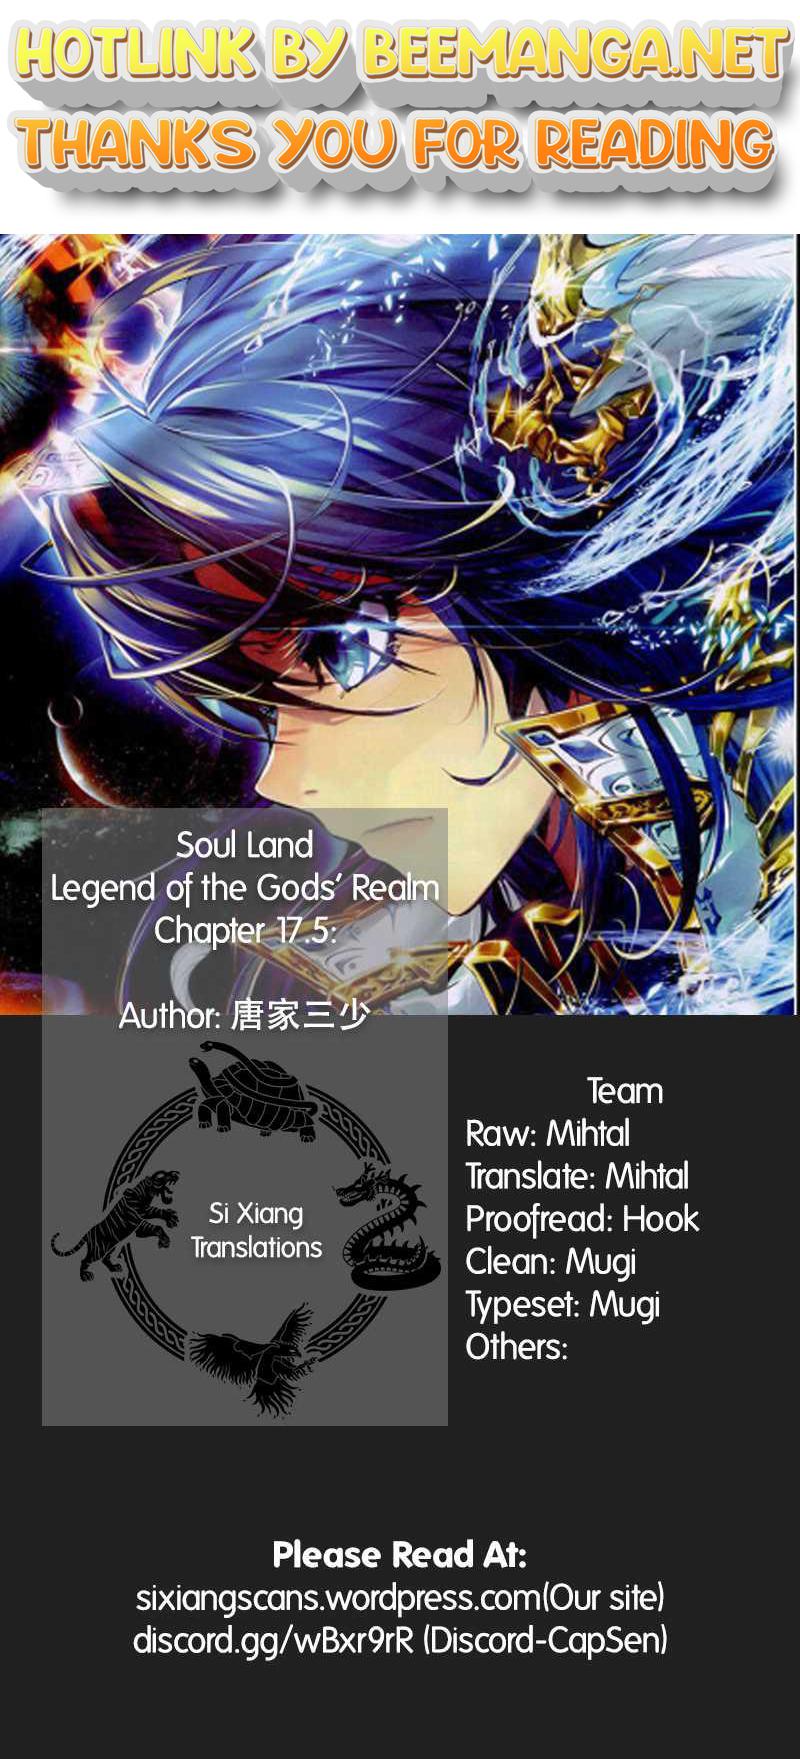 Soul Land - Legend of The Gods’ Realm Chapter 29 (Chapter 17.5)